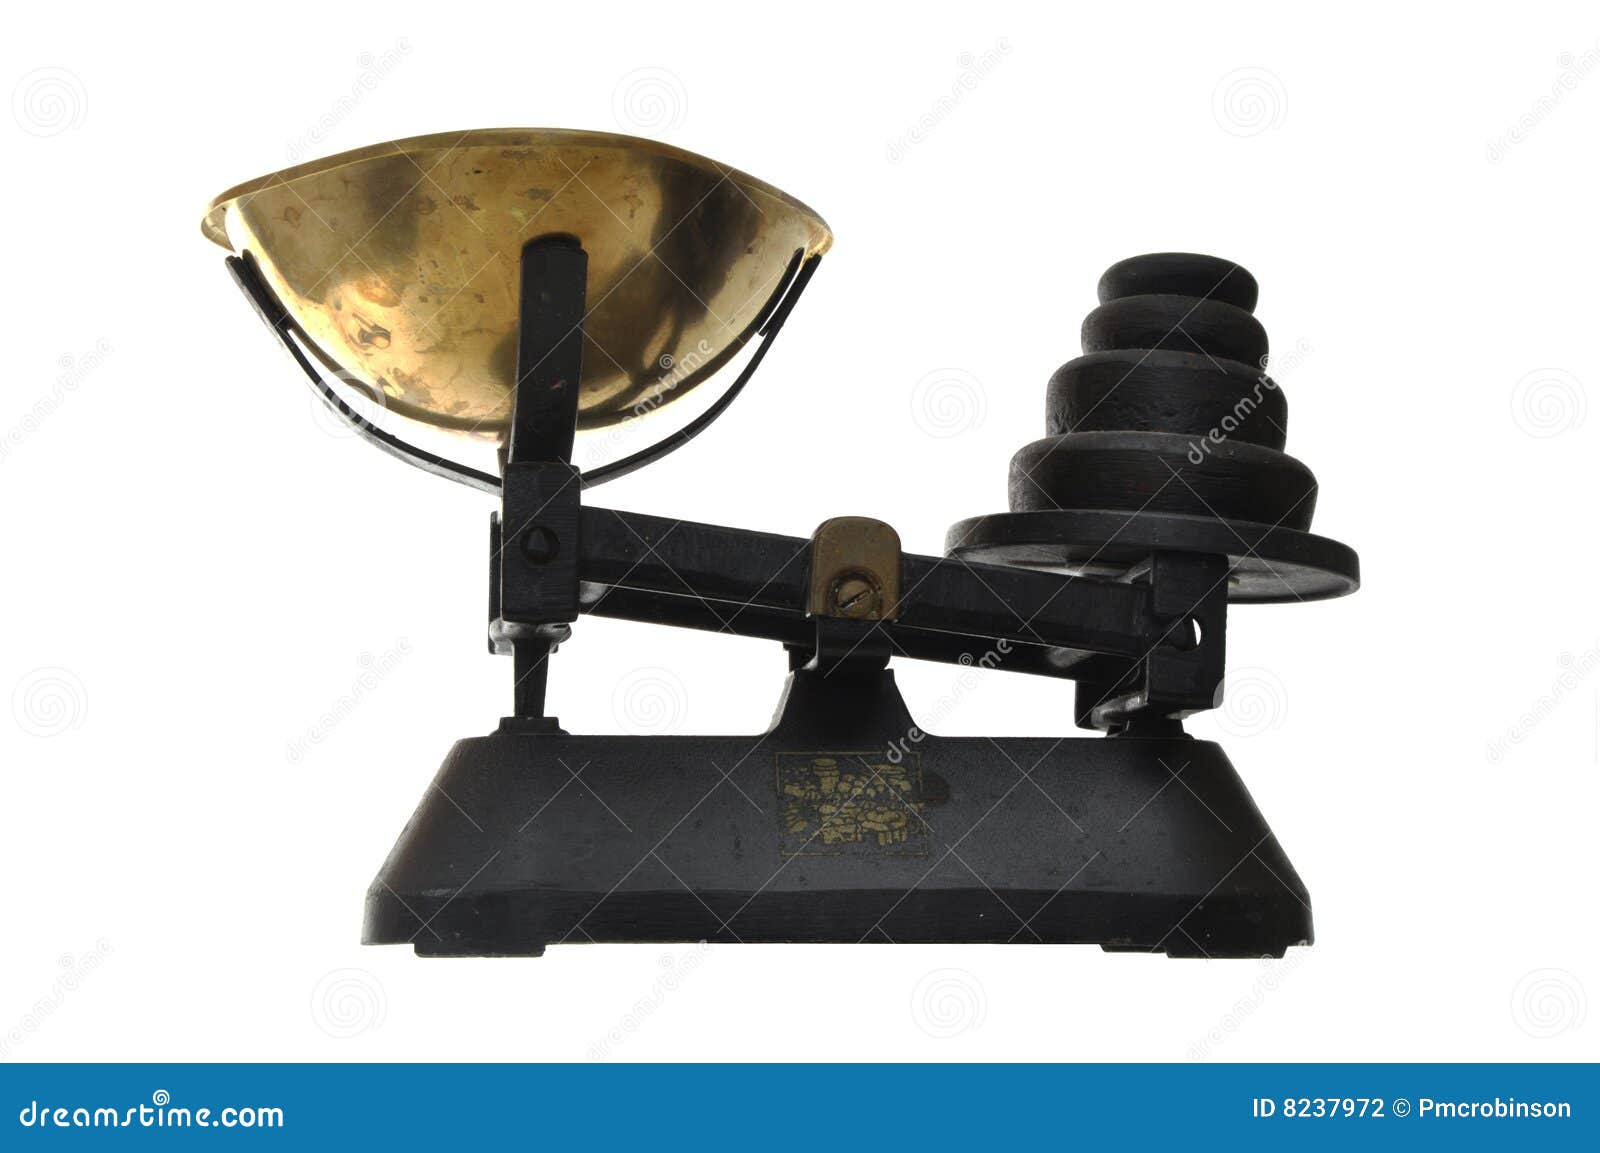 https://thumbs.dreamstime.com/z/kitchen-scales-8237972.jpg